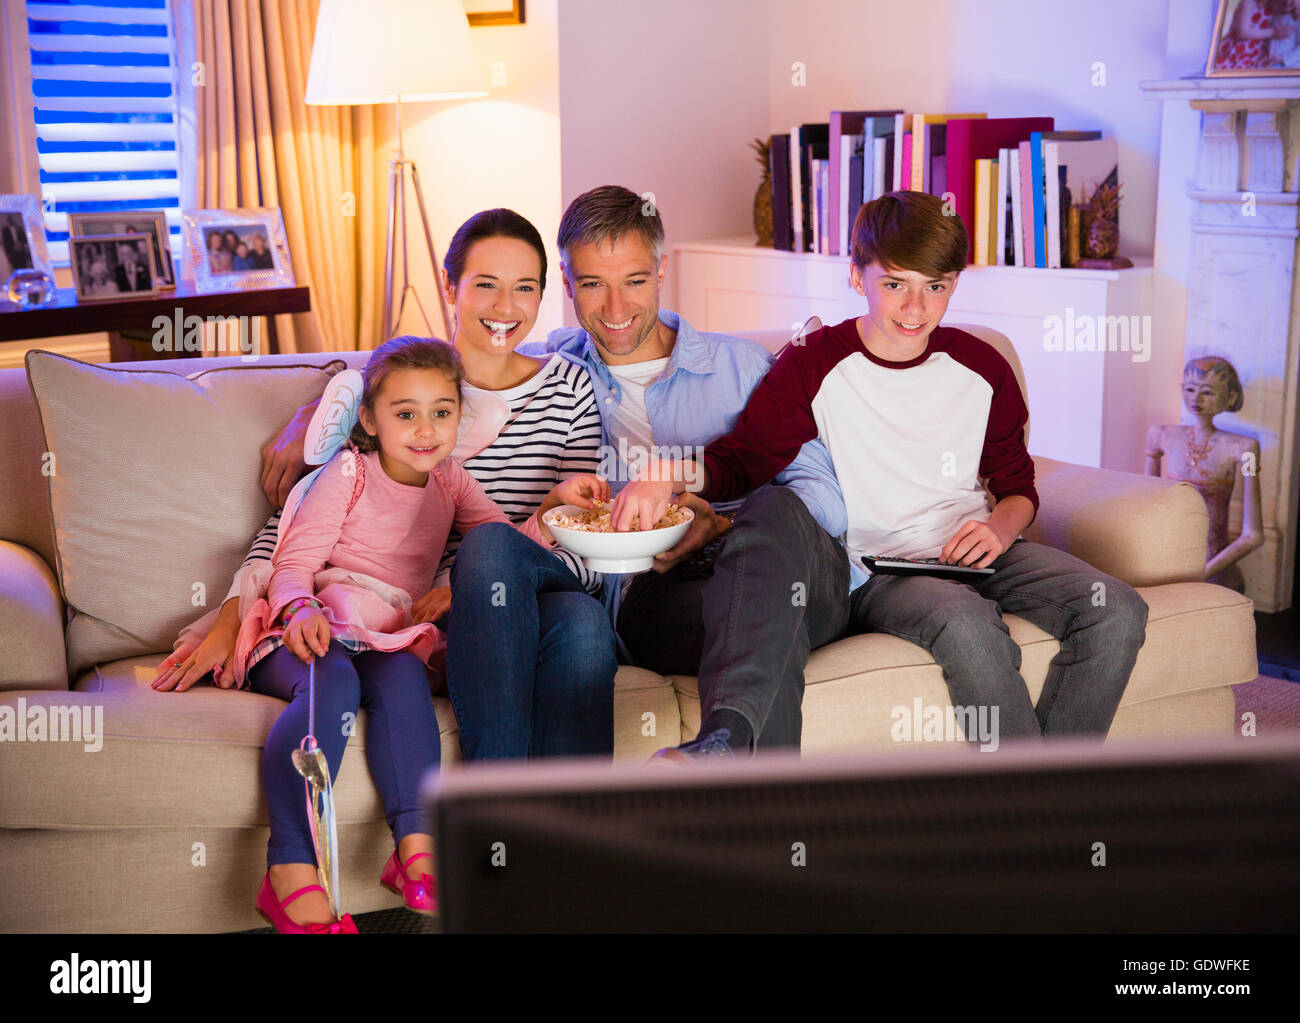 Family eating popcorn and watching TV in living room Stock Photo